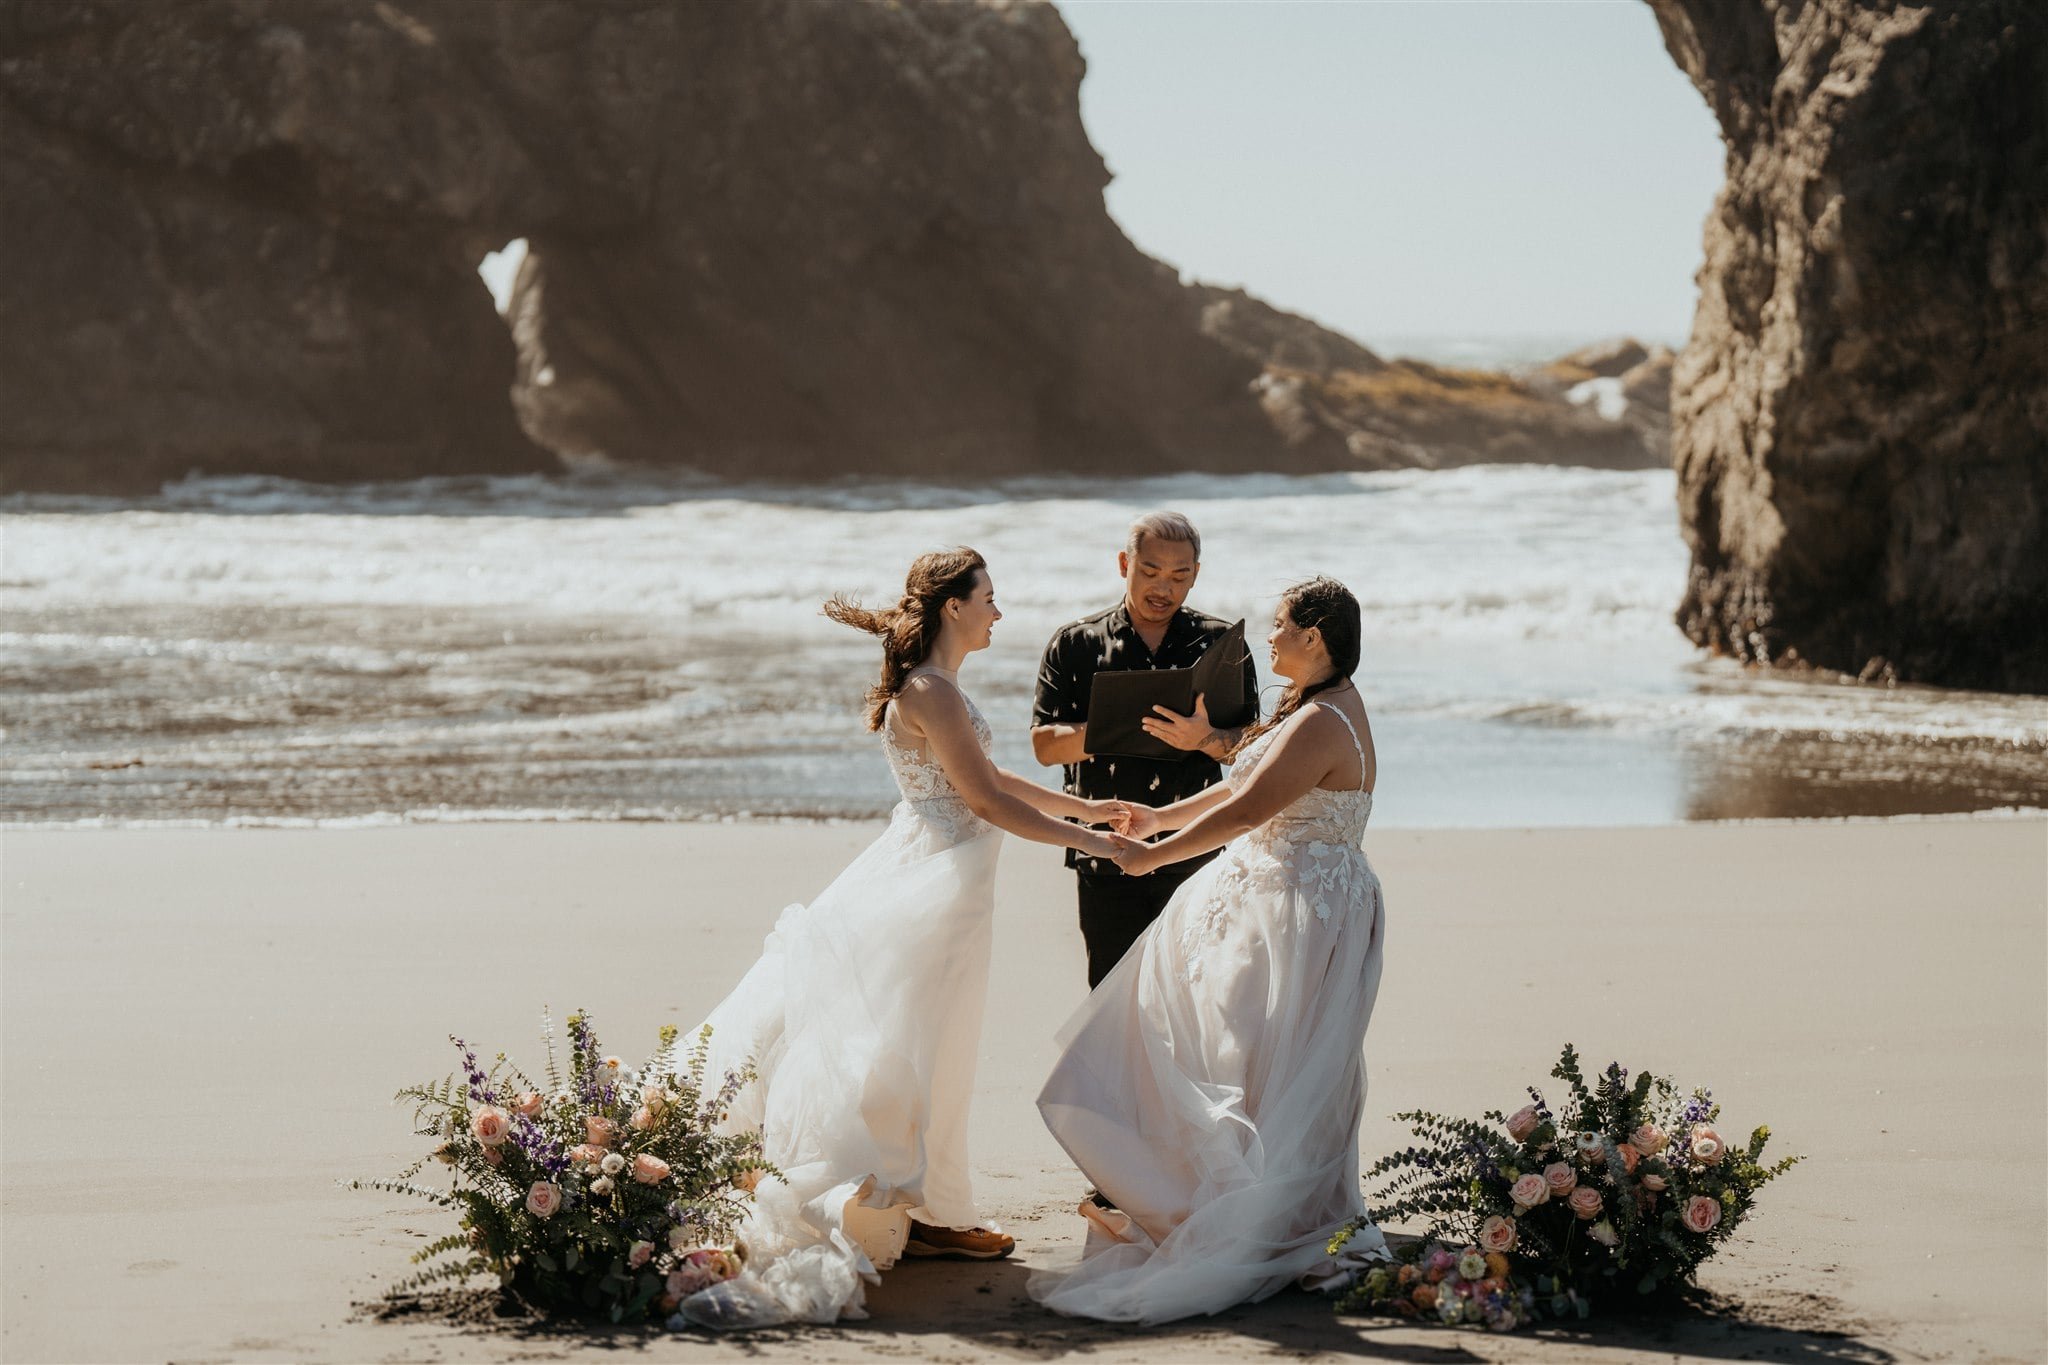 Windy elopement ceremony on the beach on the Oregon Coast